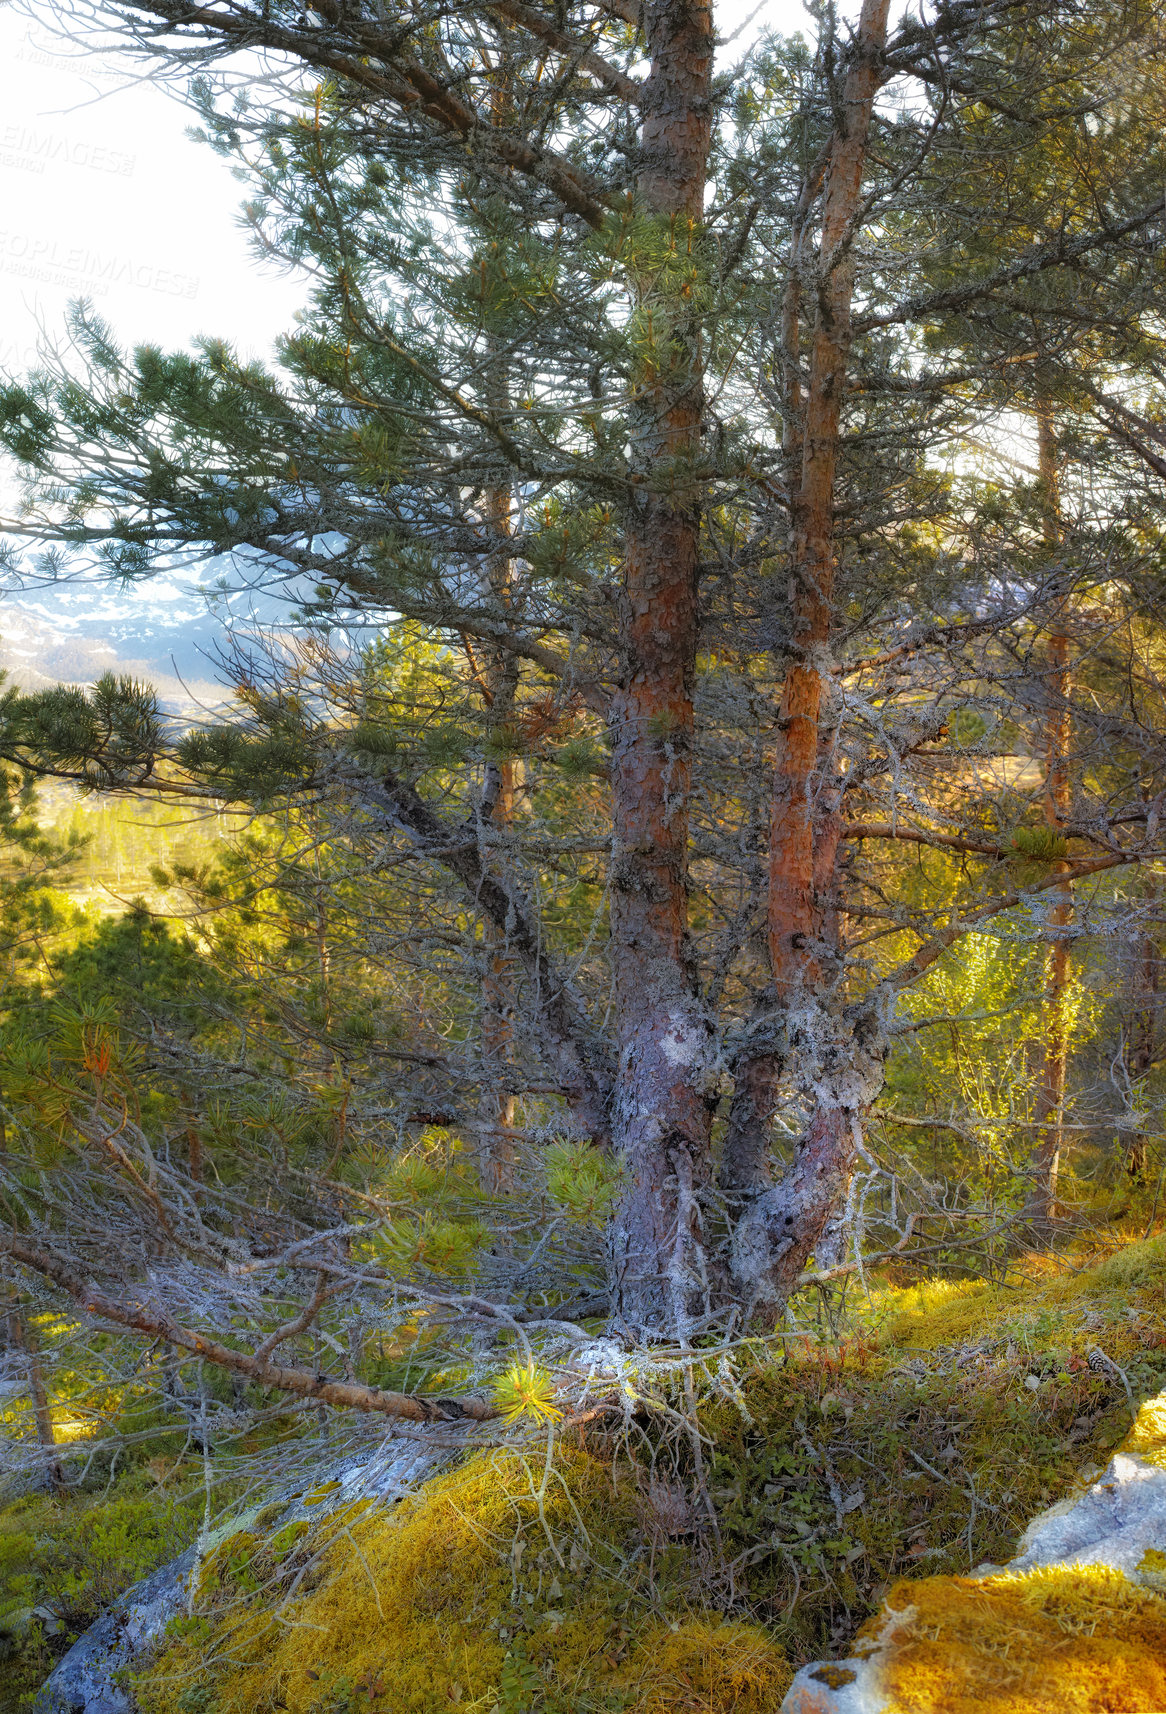 Buy stock photo Lush rocky wilderness with wild trees and shrubs in Bodo, Nordland, Noway. Scenic natural landscape with wooden texture of old bark in a remote and peaceful forest or woodlands to travel and explore